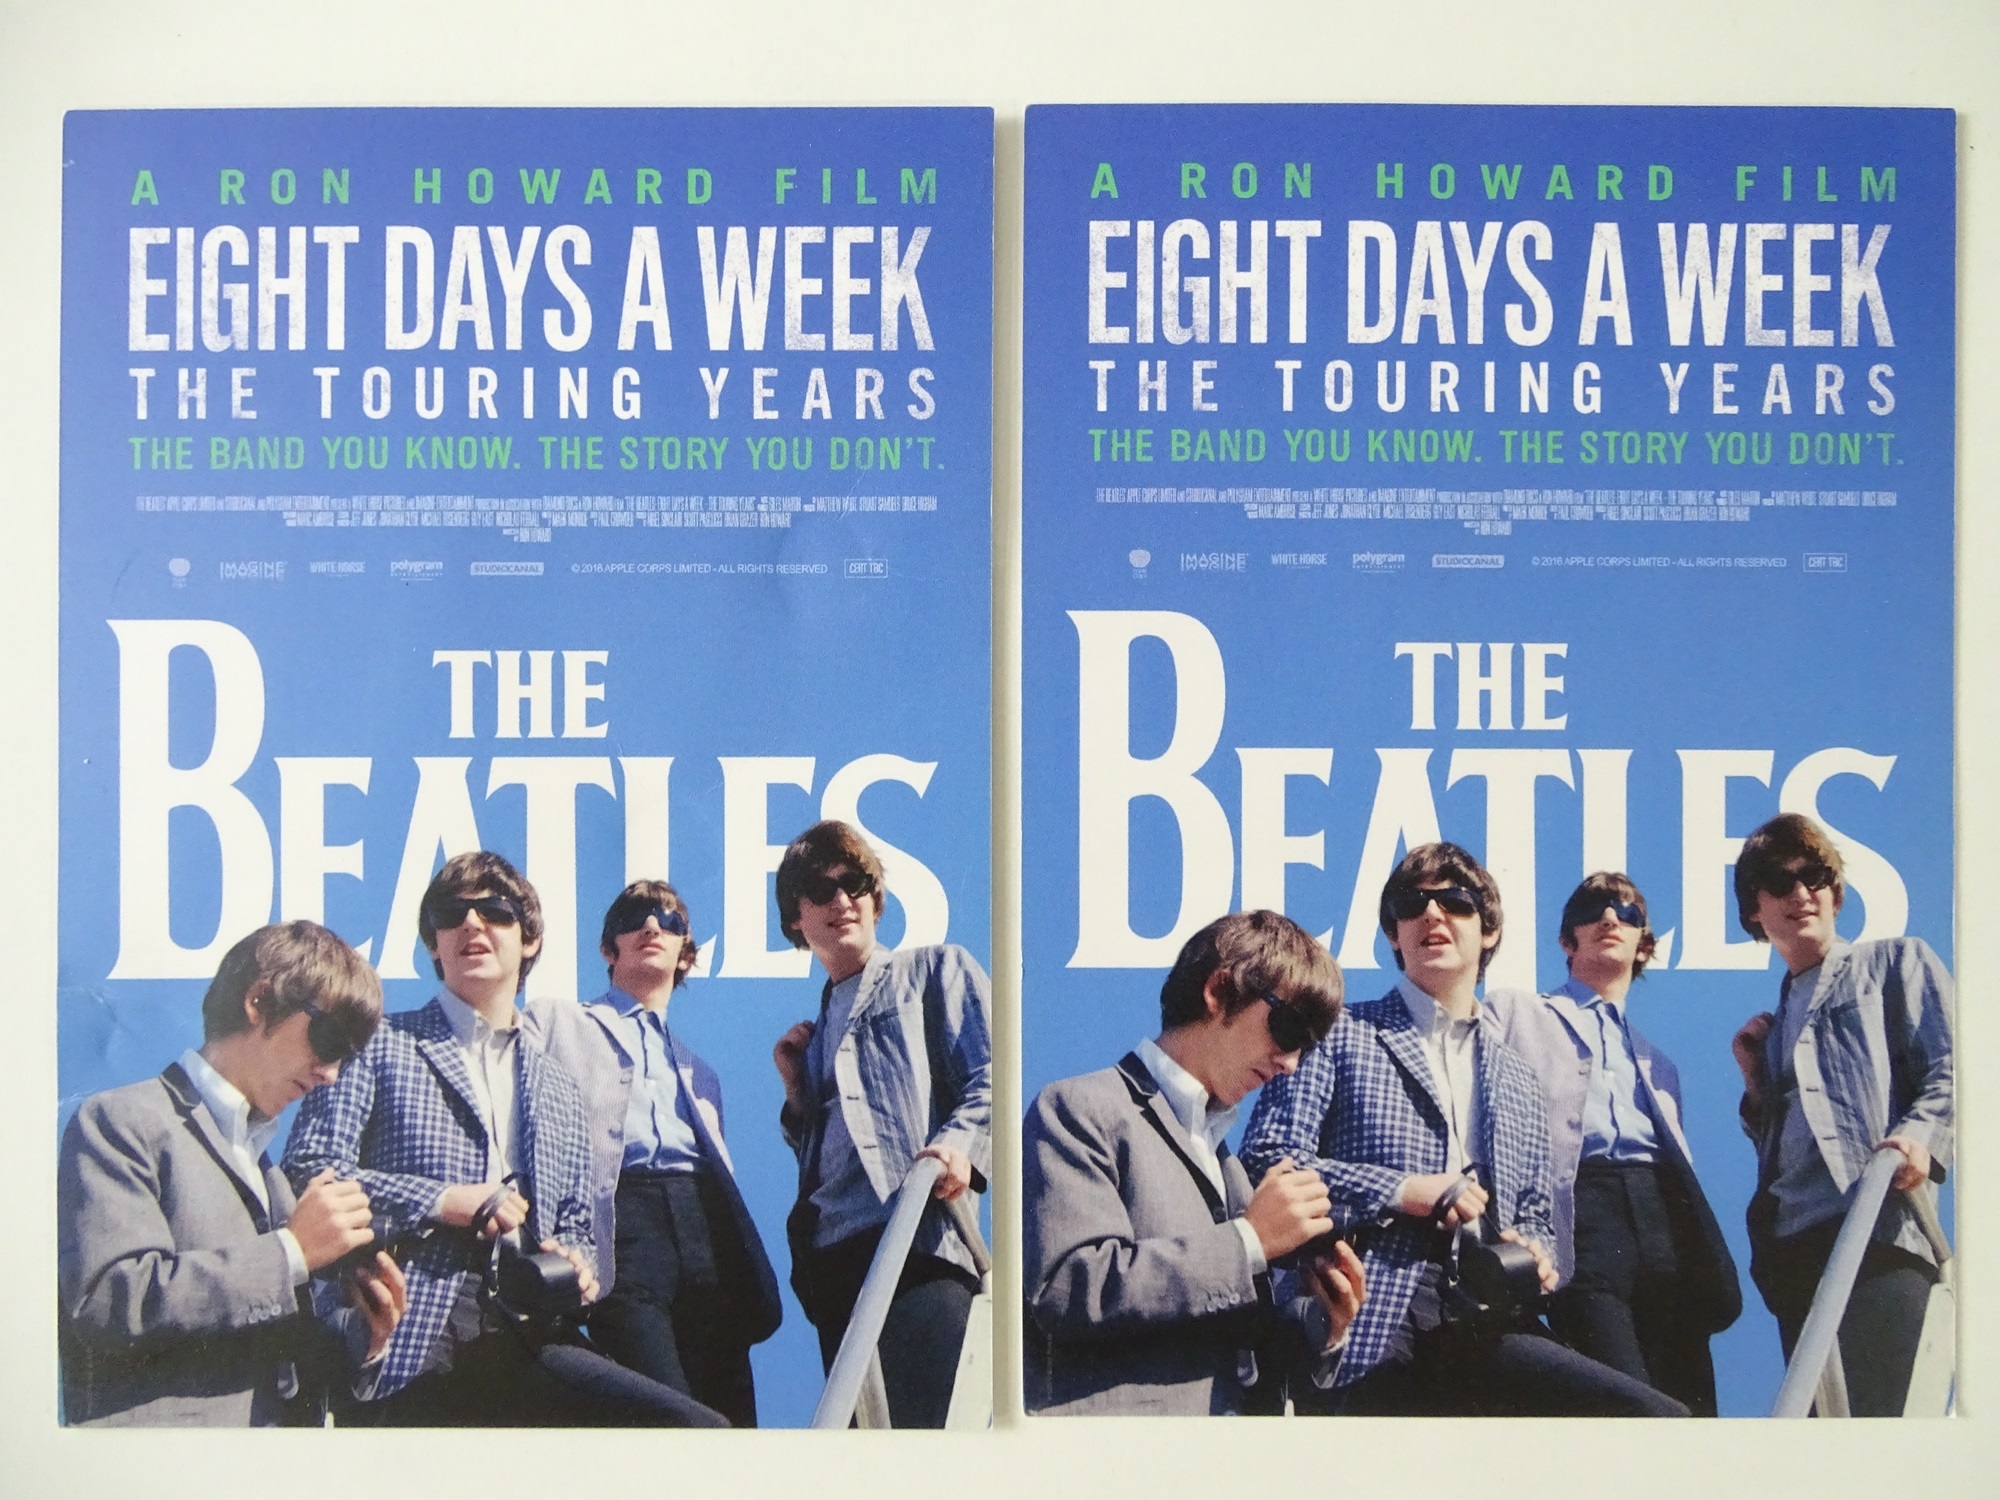 Lot 539 The Beatles 8 Days A Week The Touring 